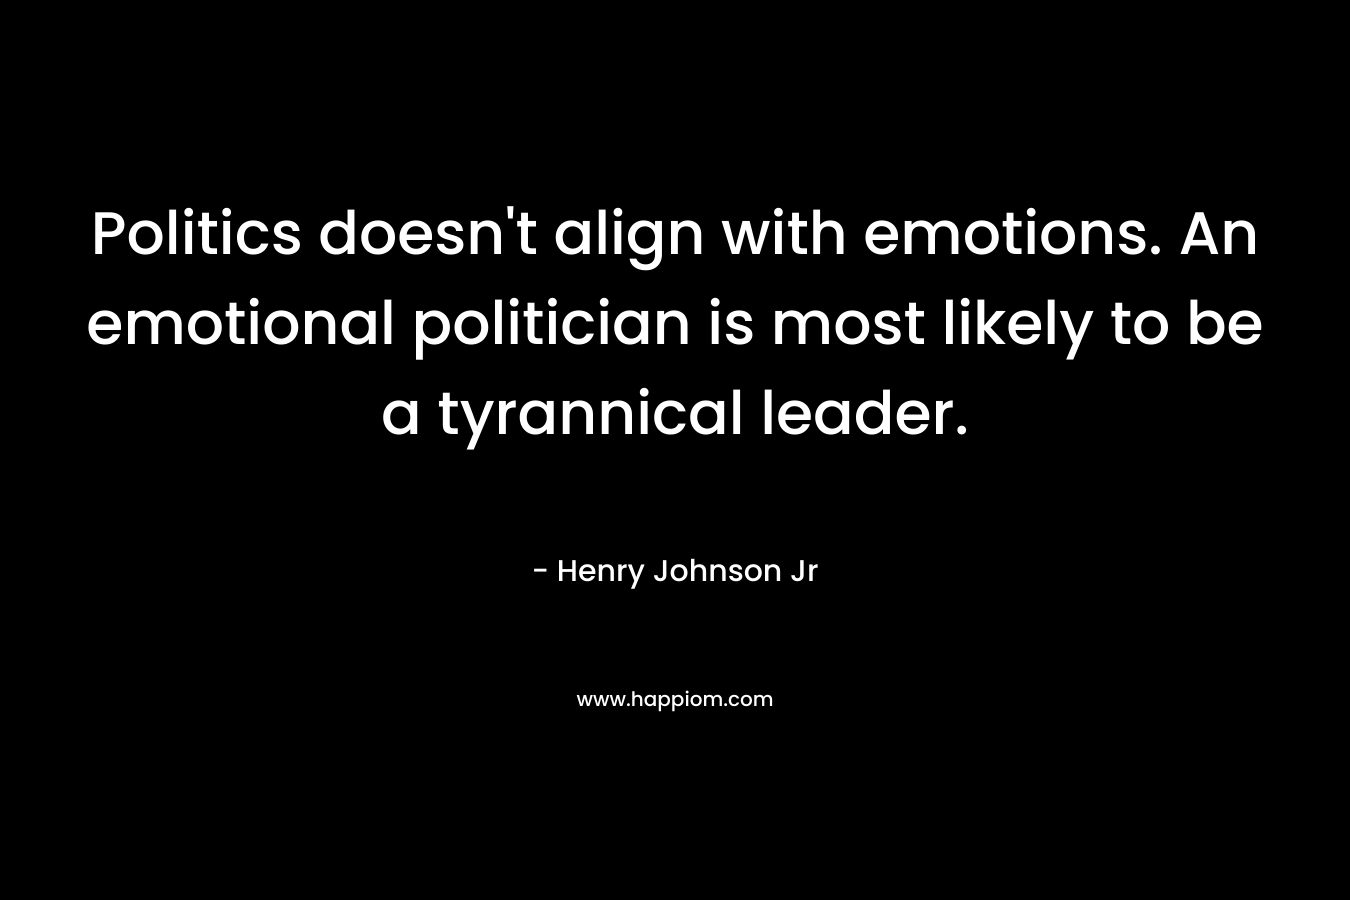 Politics doesn't align with emotions. An emotional politician is most likely to be a tyrannical leader.